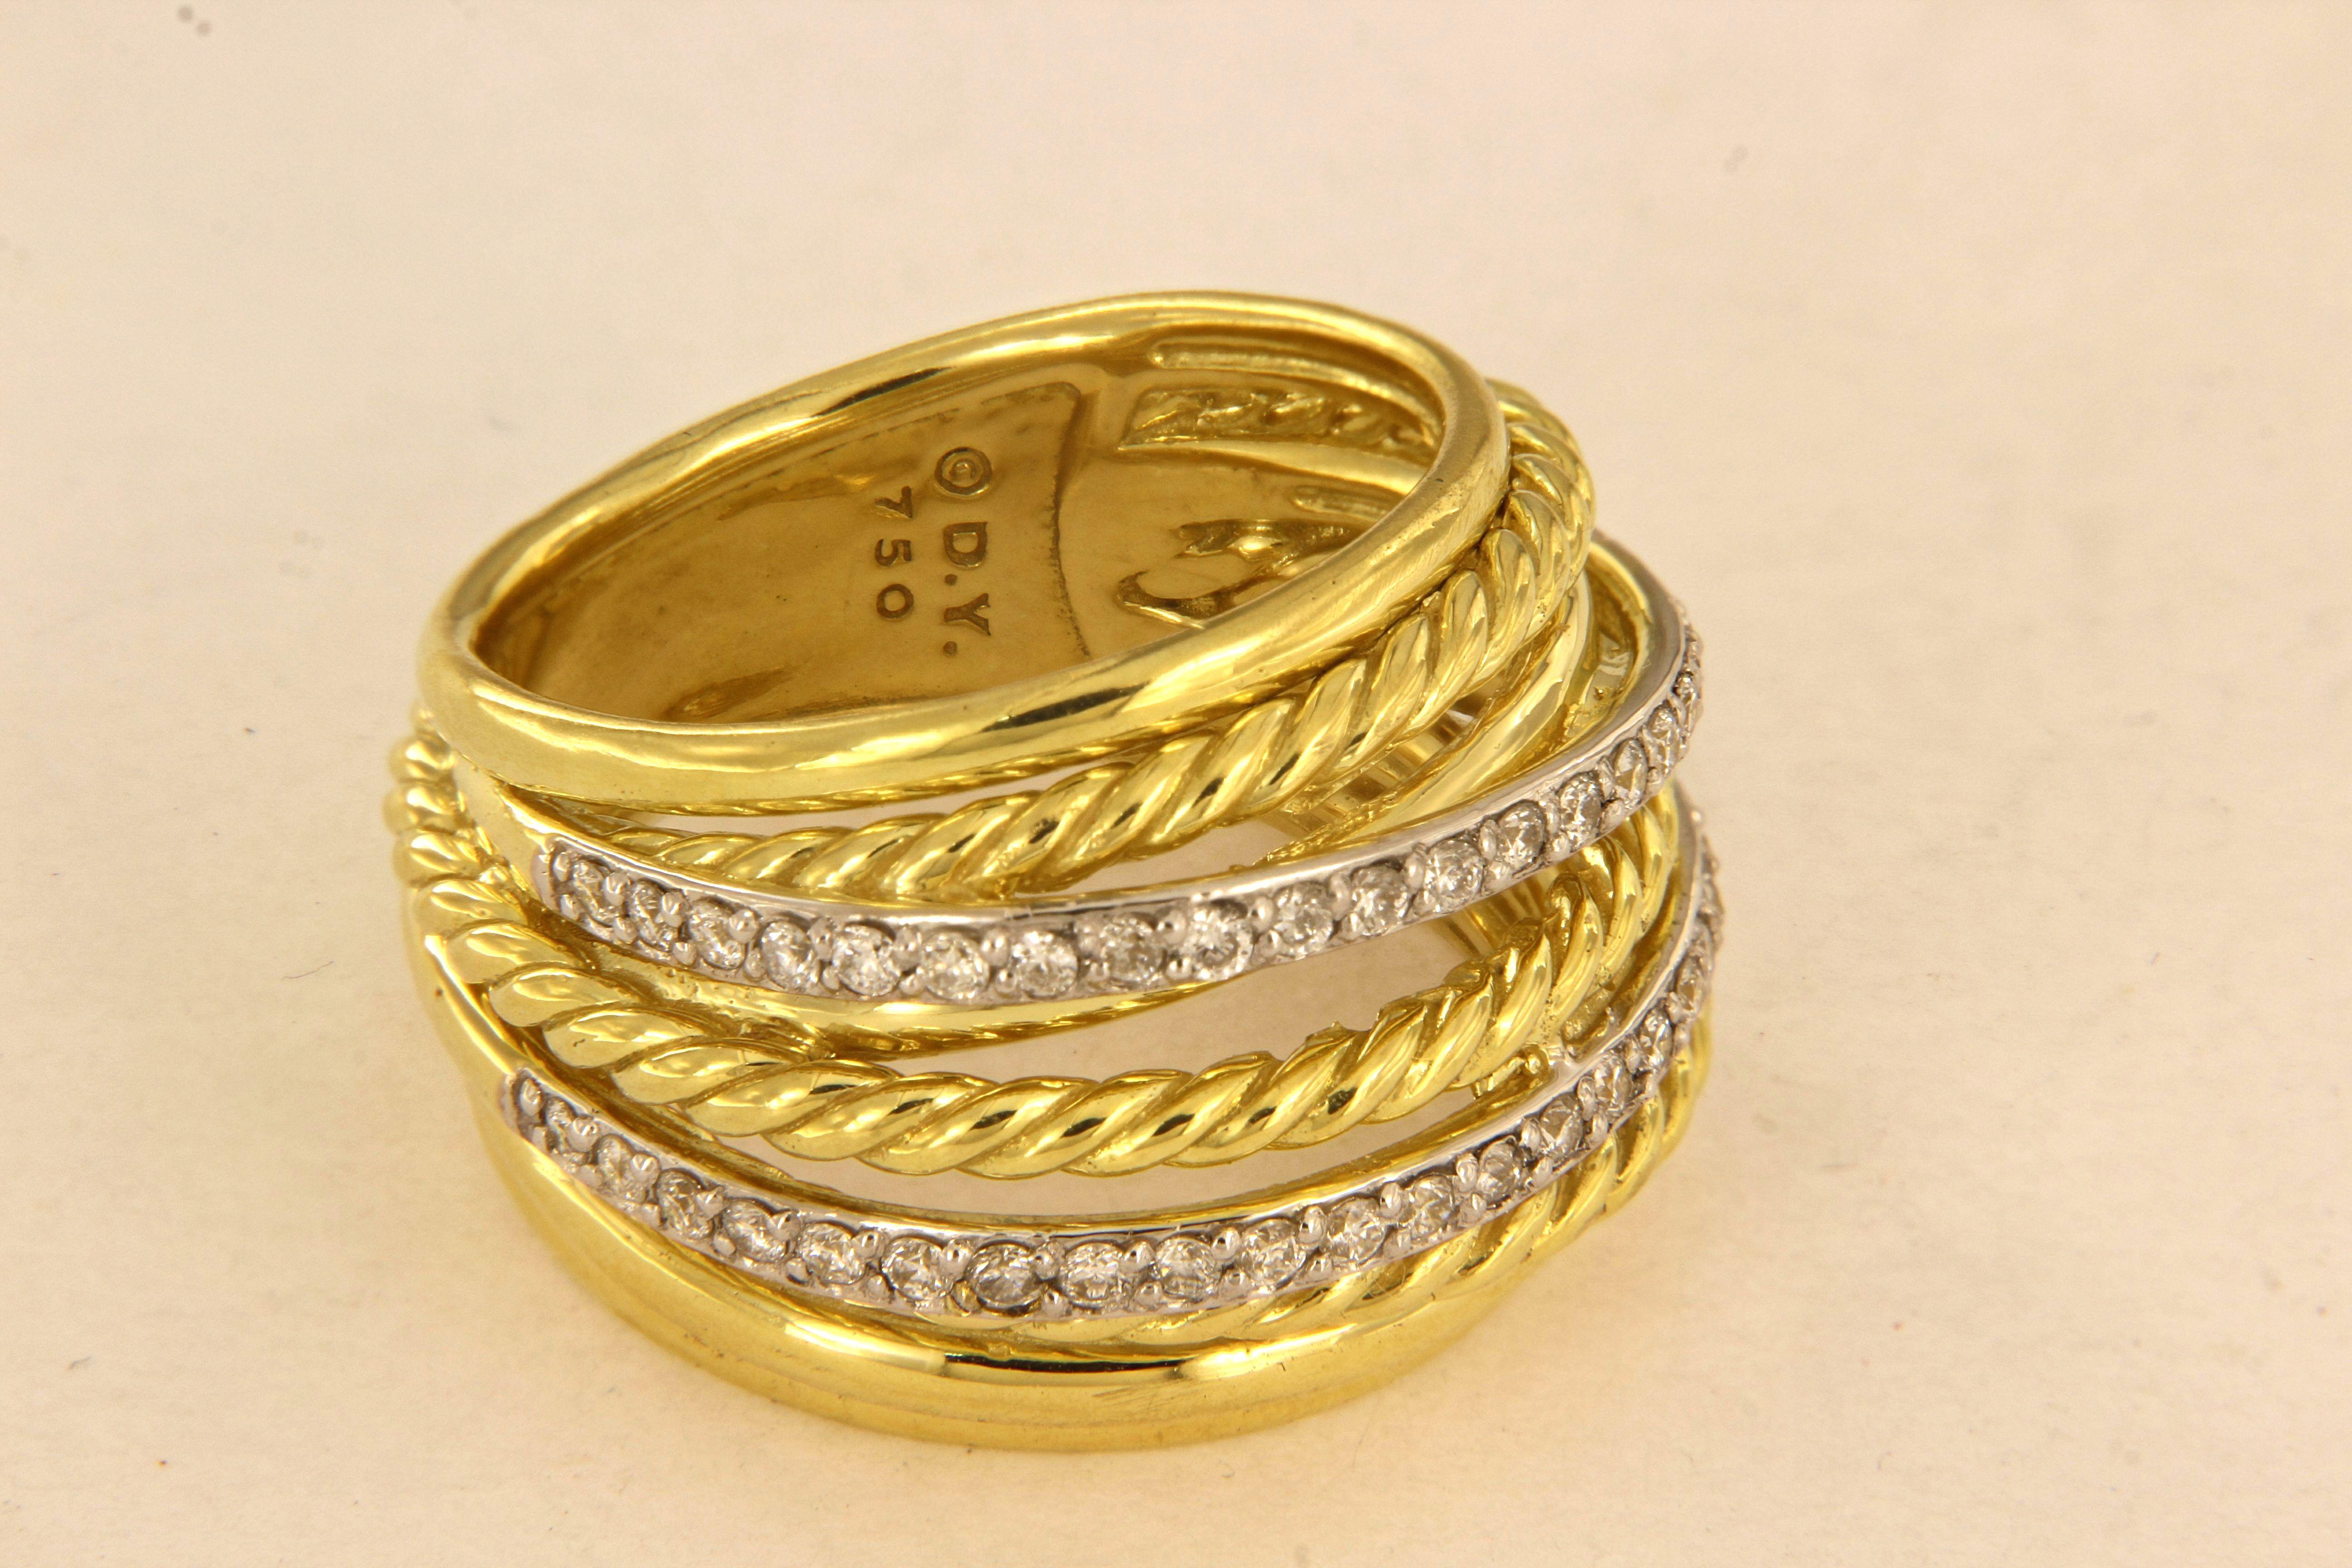 THE CROSSOVER COLLECTION

-18k Yellow Gold
-Ring size: 7.5
-Ring width: 0.3-0.7”
-Diamond: 0.67 ct.

Like-new, mint condition ring.
David Yurman box included.

Retail: $5,200